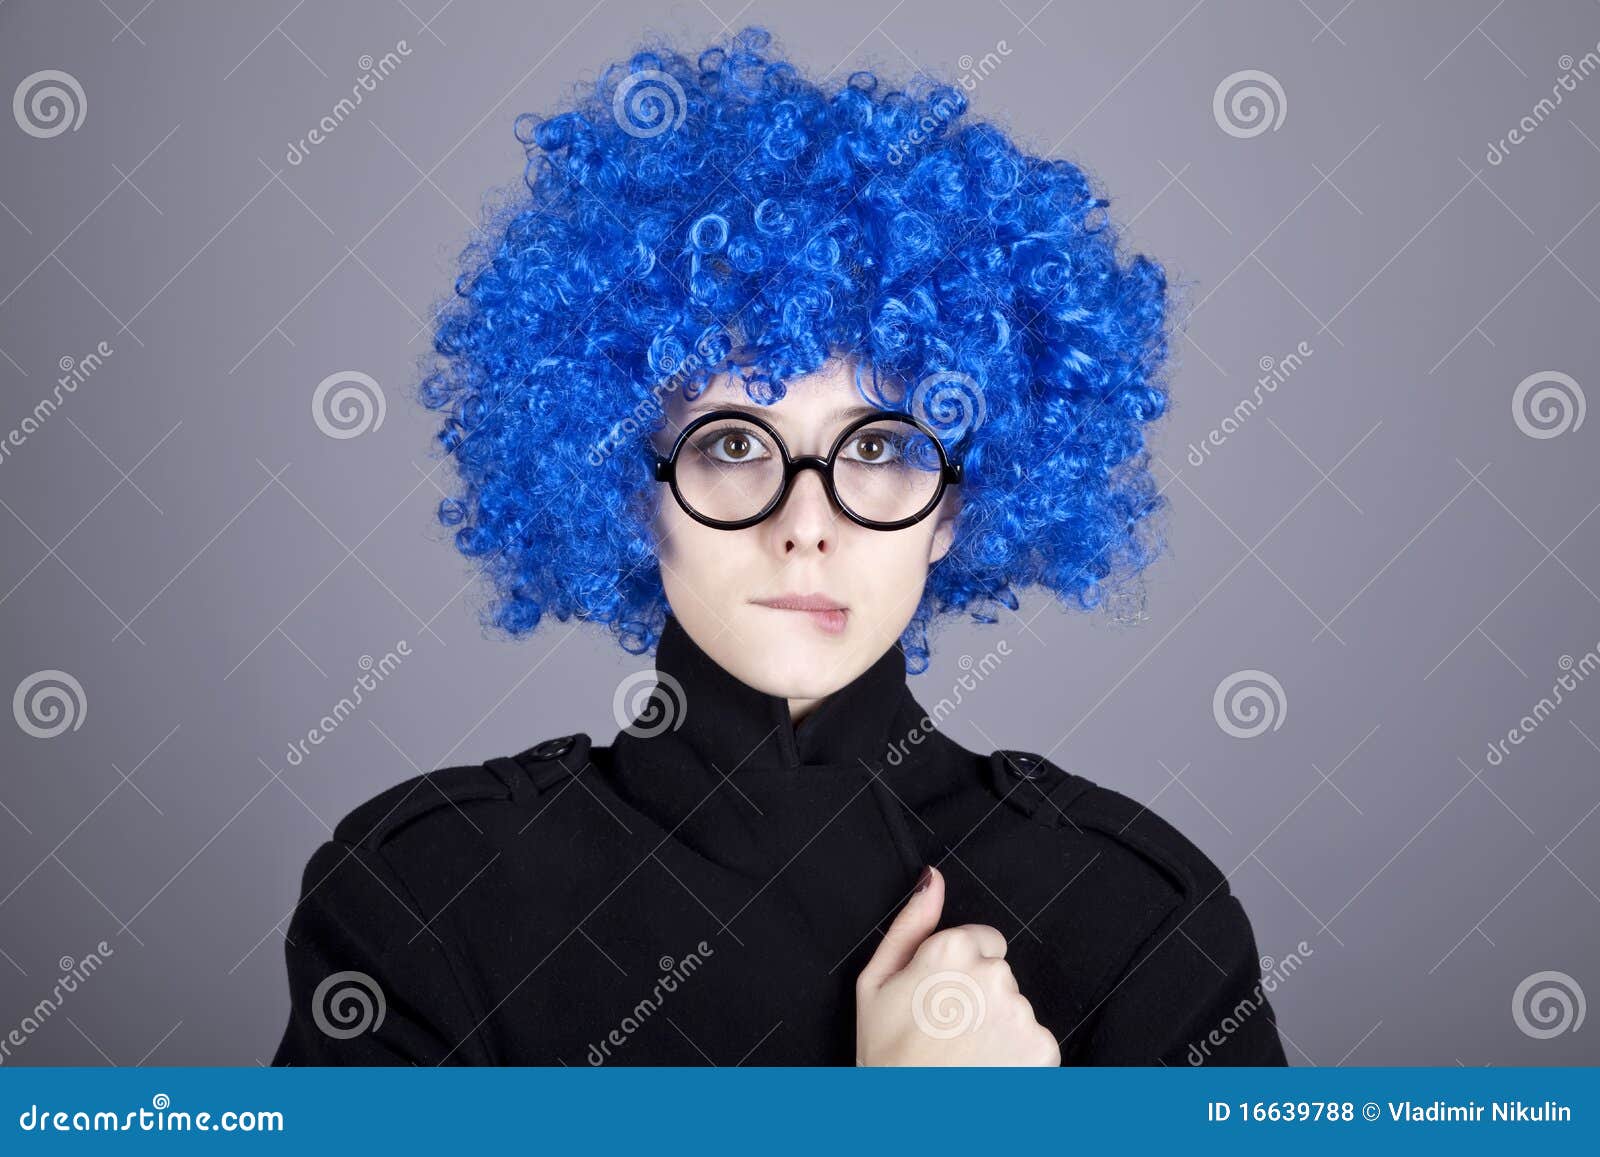 7. Teenager with dark blue hair and glasses - wide 1